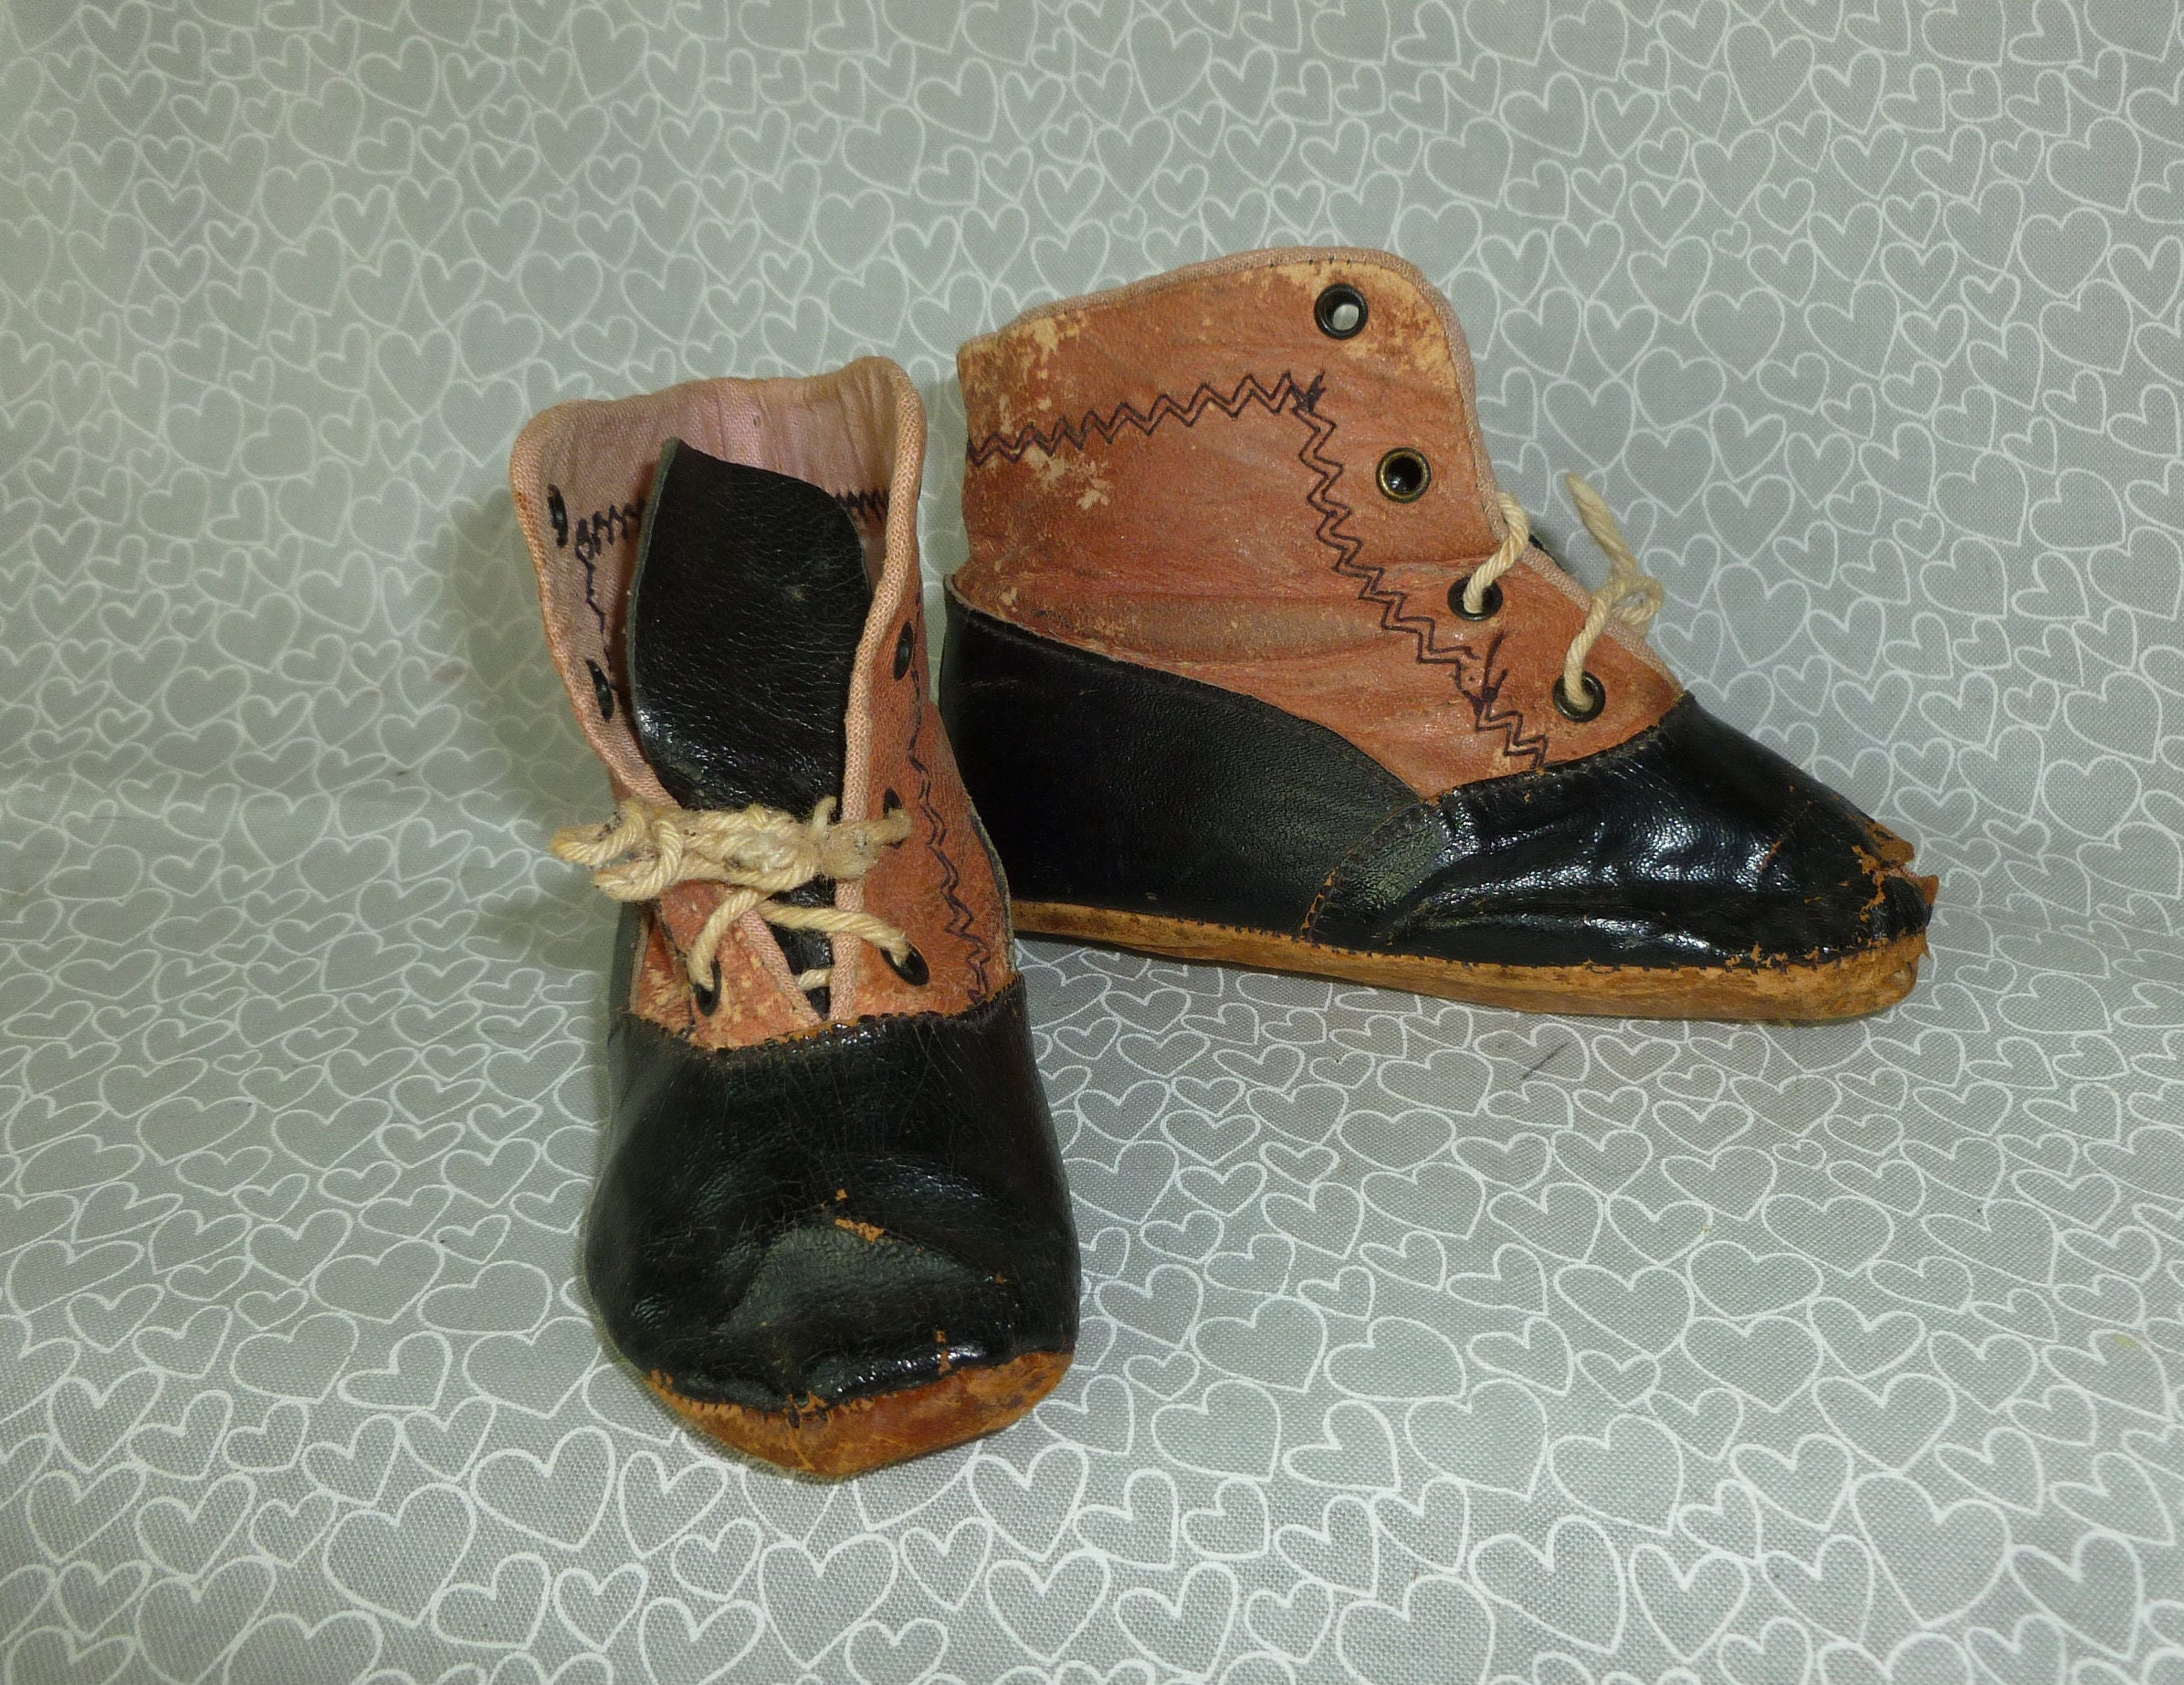 1910s Antique Childrens Button Boots Ivory Leather /Canvas Lining Vintage Labeled 5.5 Very RARE! Zapatos Zapatos para niña Botas 